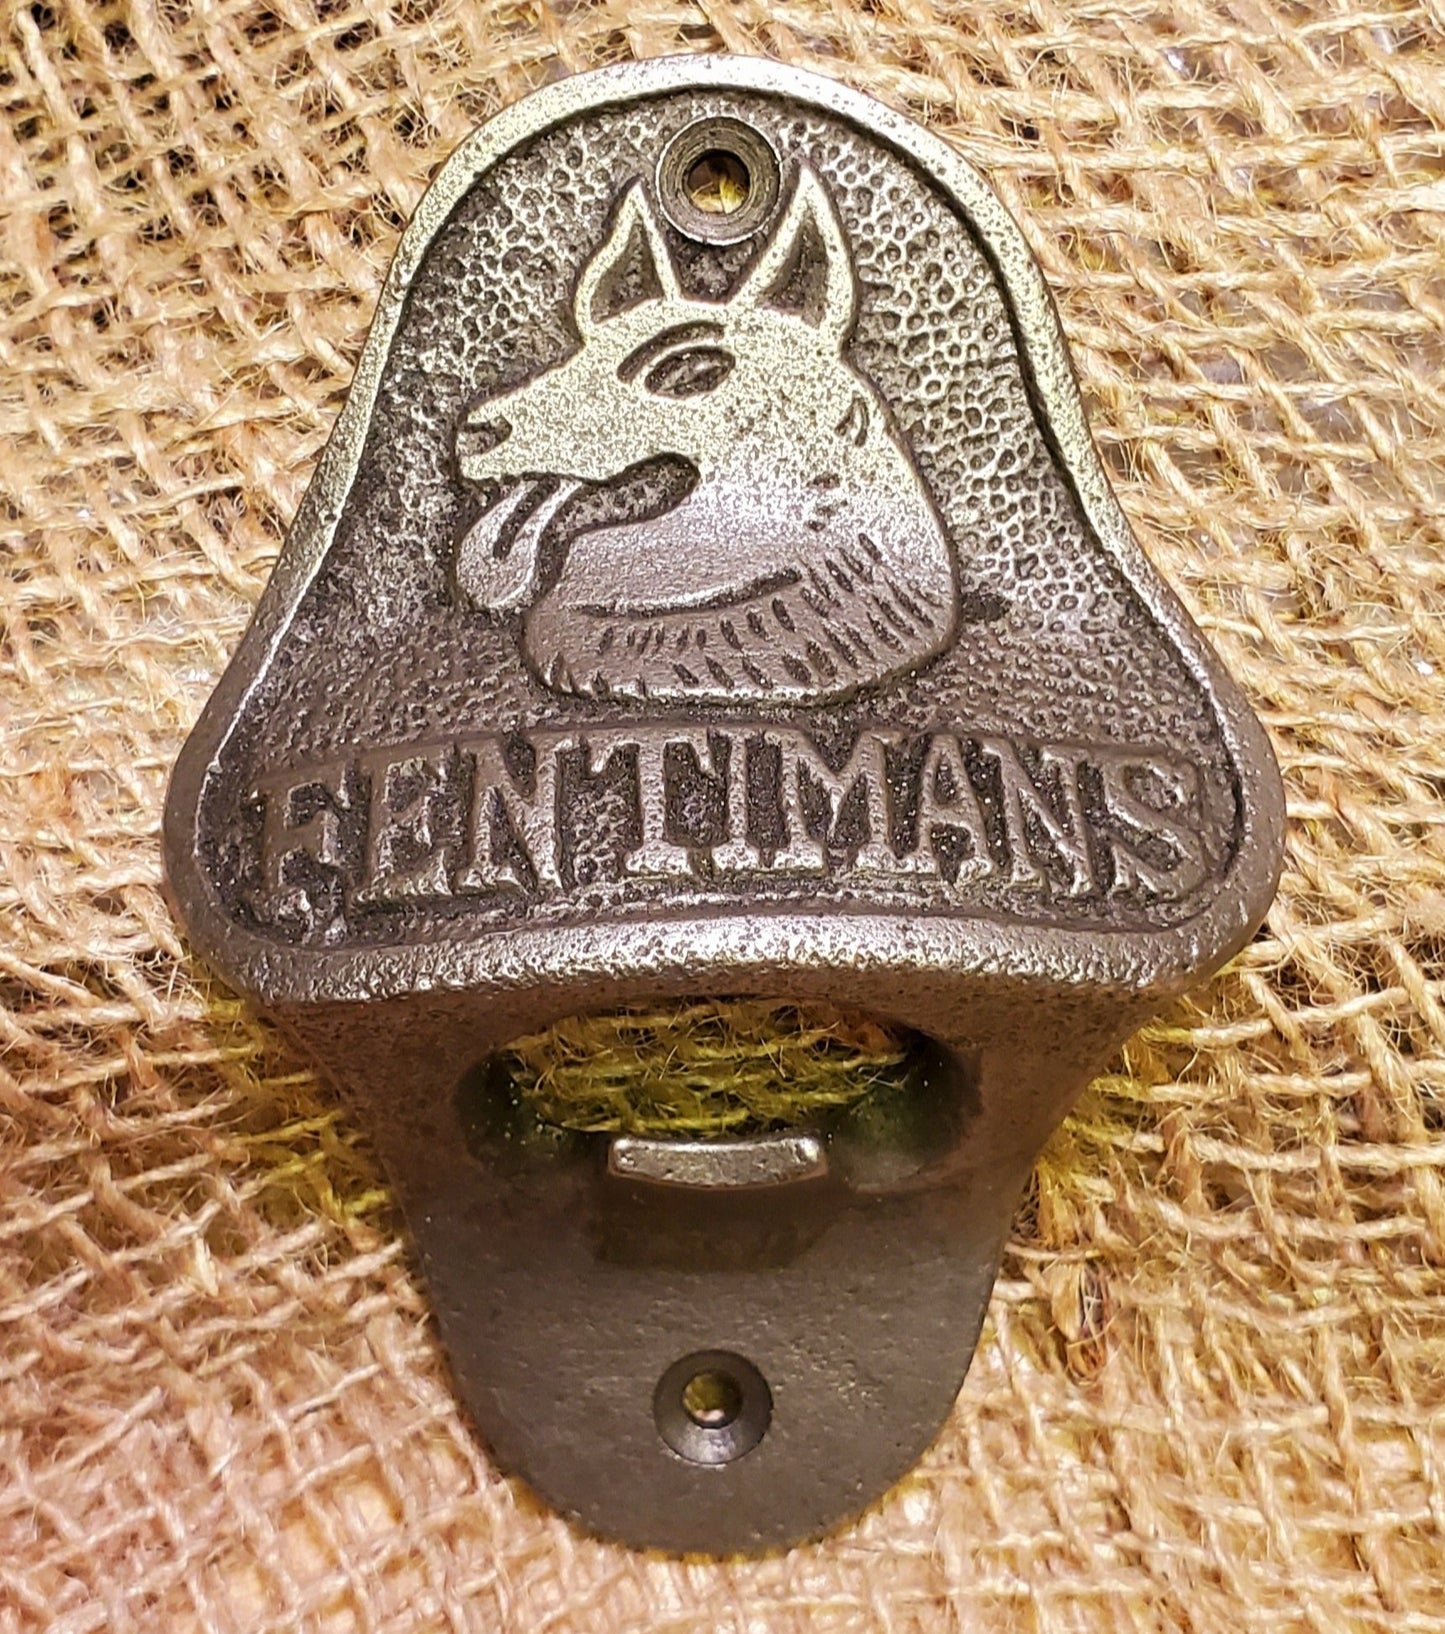 Fentimans - Bottle Opener - Spearhead Collection - Bottle Openers - Bottle Openers, The Man Cave